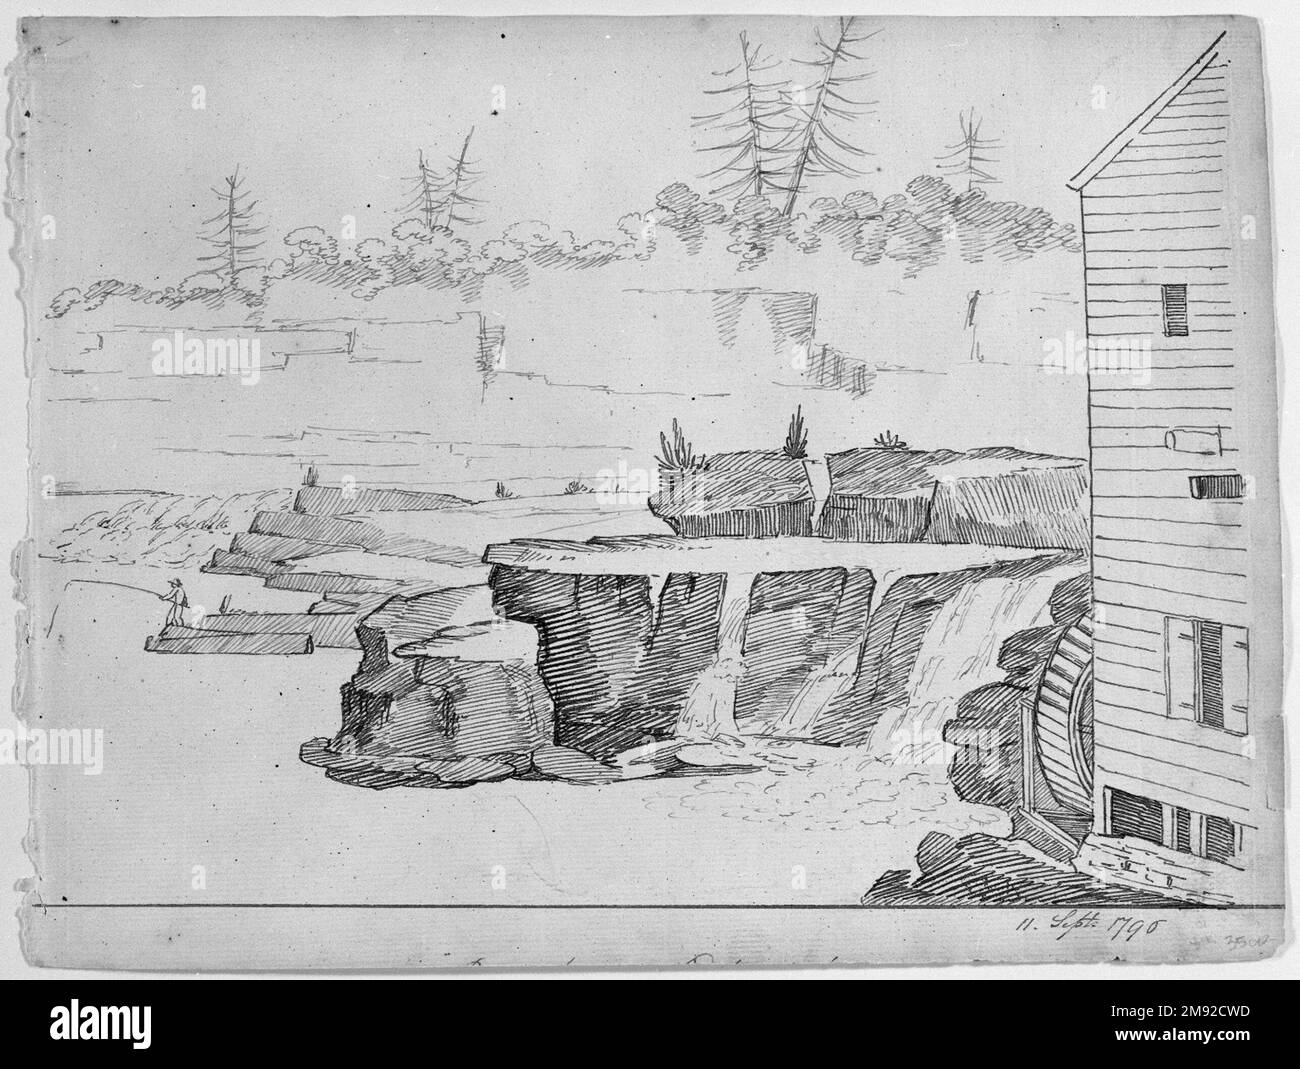 From the Mill Alexander Robertson (American, born Scotland, 1772-1841). From the Mill, September 11, 1796. Black ink on off-white, moderately thick, moderately textured laid paper, Sheet: 8 3/4 x 11 1/2 in. (22.2 x 29.2 cm).  In this drawing Alexander Robertson used a stylized graphic shorthand developed by his brother Archibald, who authored the first drawing manual published in the United States, Elements of the Graphic Arts (1802). The artist rendered leaves with looping strokes of his pen, created shading with parallel diagonal lines, and used lighter outlines for background motifs to indi Stock Photo